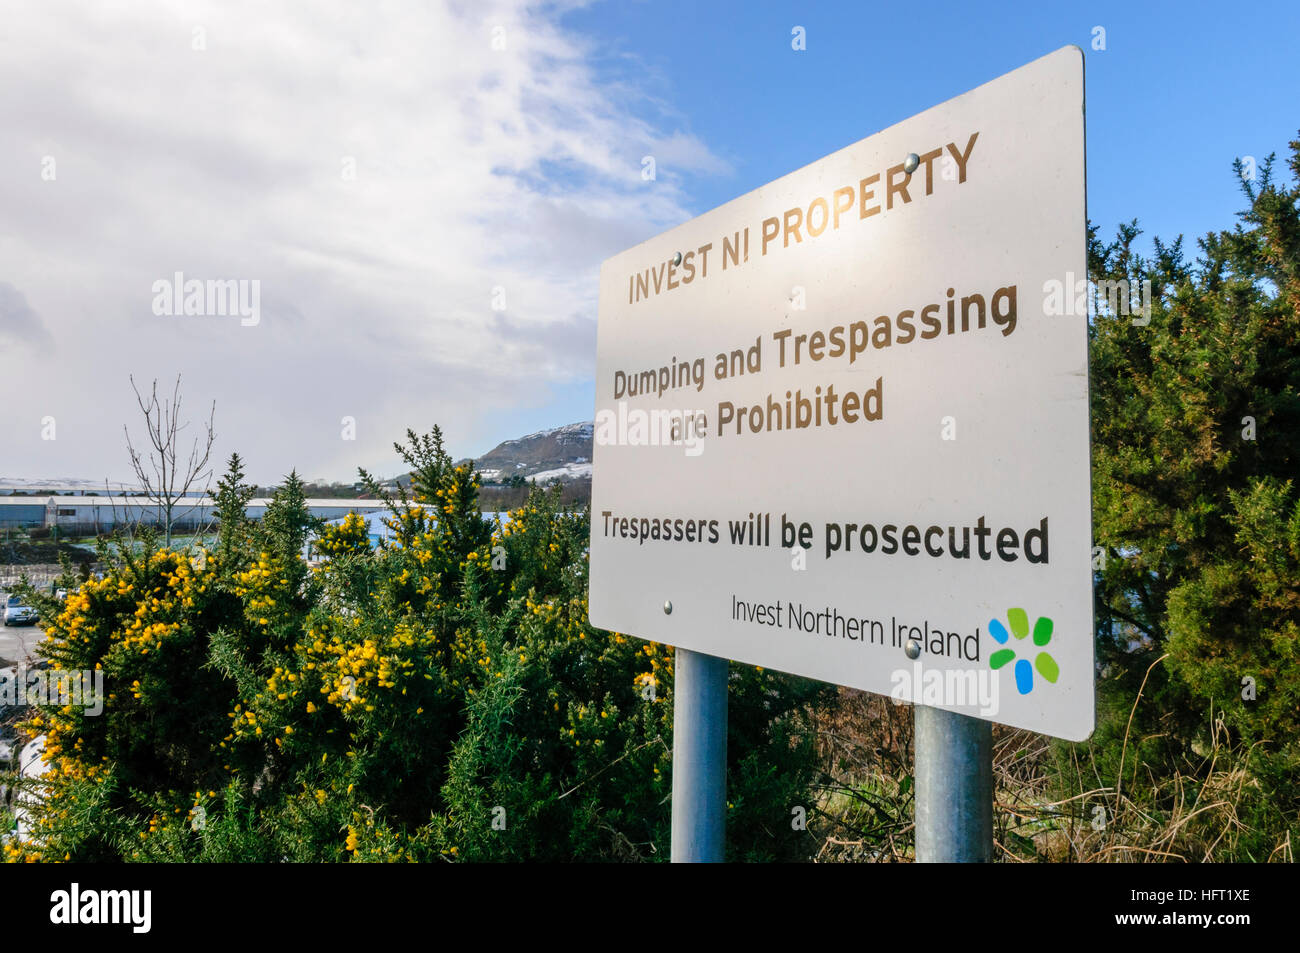 Sign at an Invest Northern Ireland site warning dumping and trespassing are prohibited. Stock Photo